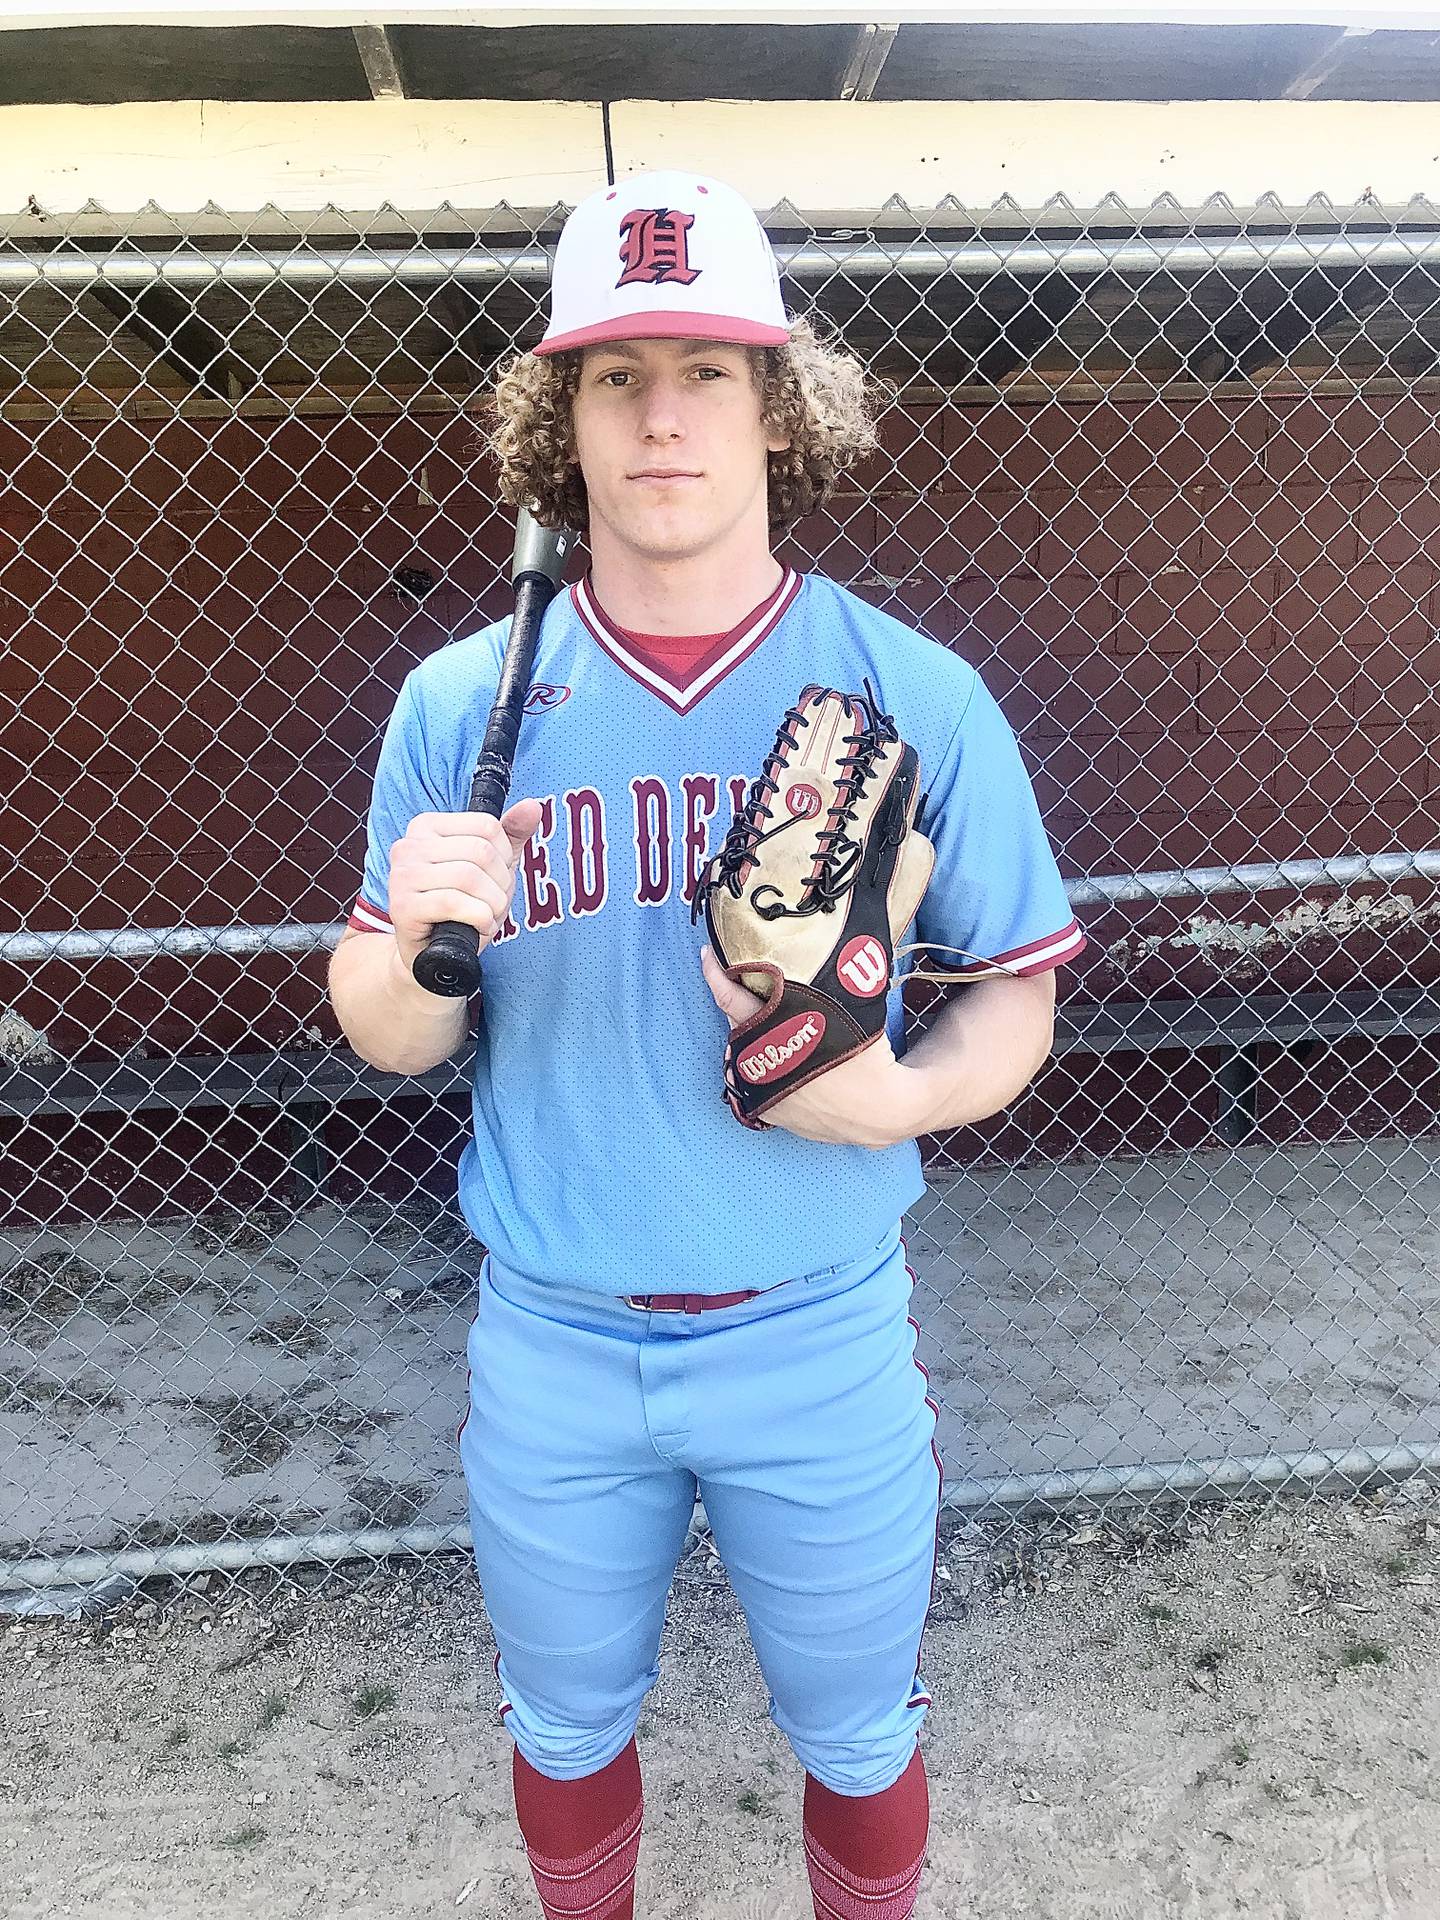 Mac Resetich sported an area-best .412 batting average, and led all area players with 40 runs scored, 31 steals, four triples and seven home runs and drove in 31 runs.